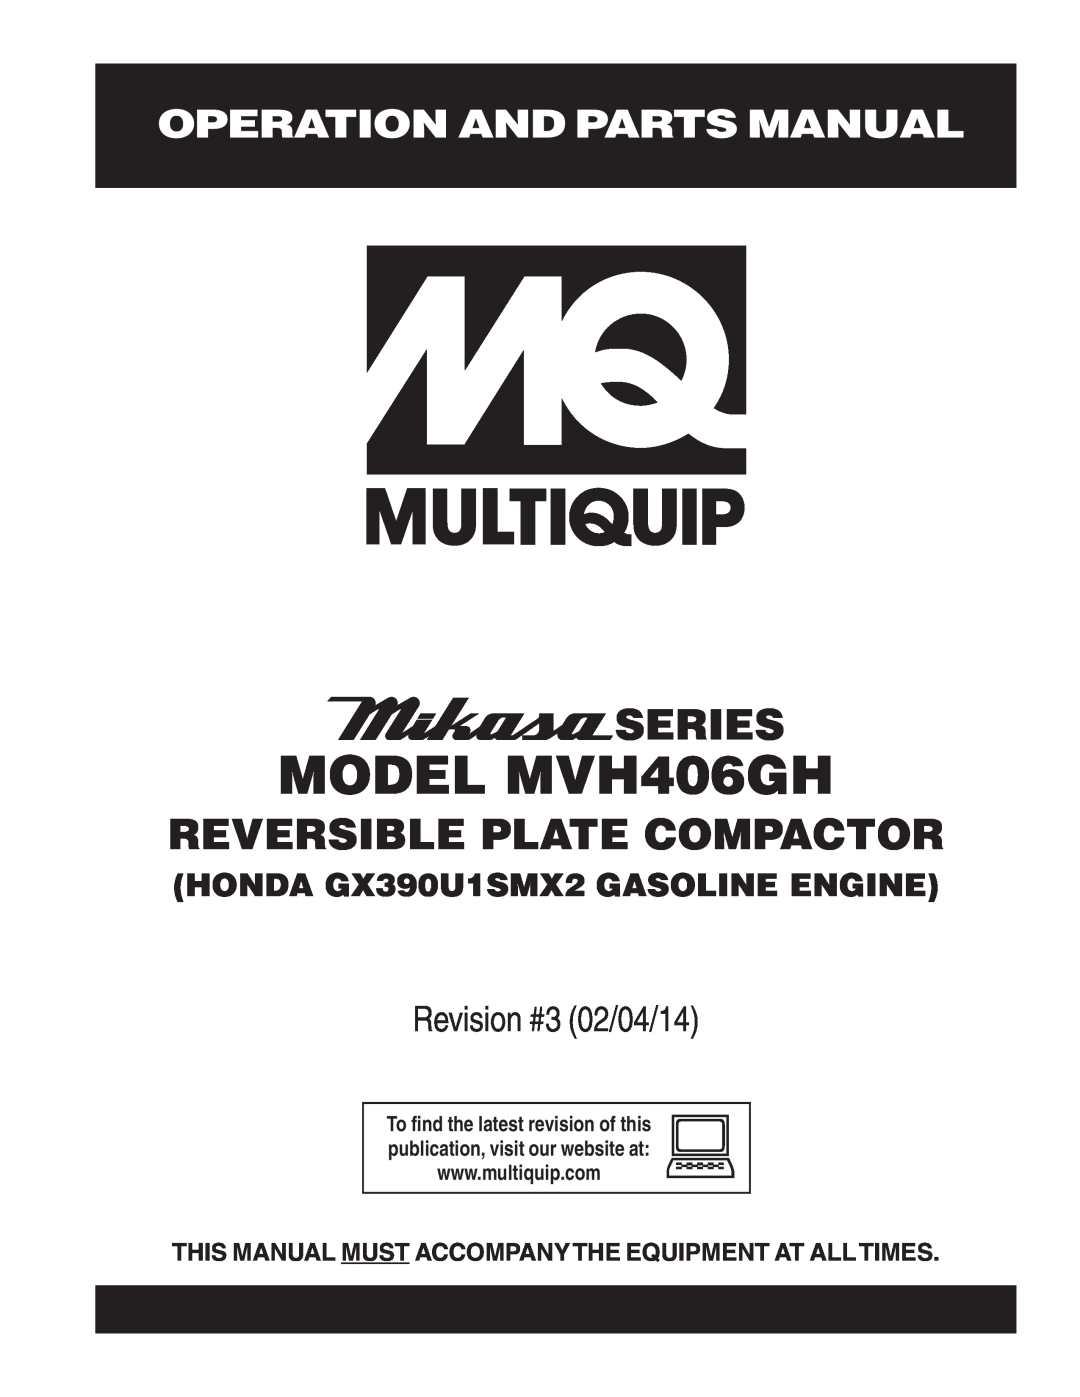 Multiquip manual Operation And Parts Manual, MODEL MVH406GH, Series, Reversible Plate Compactor, Revision #3 02/04/14 